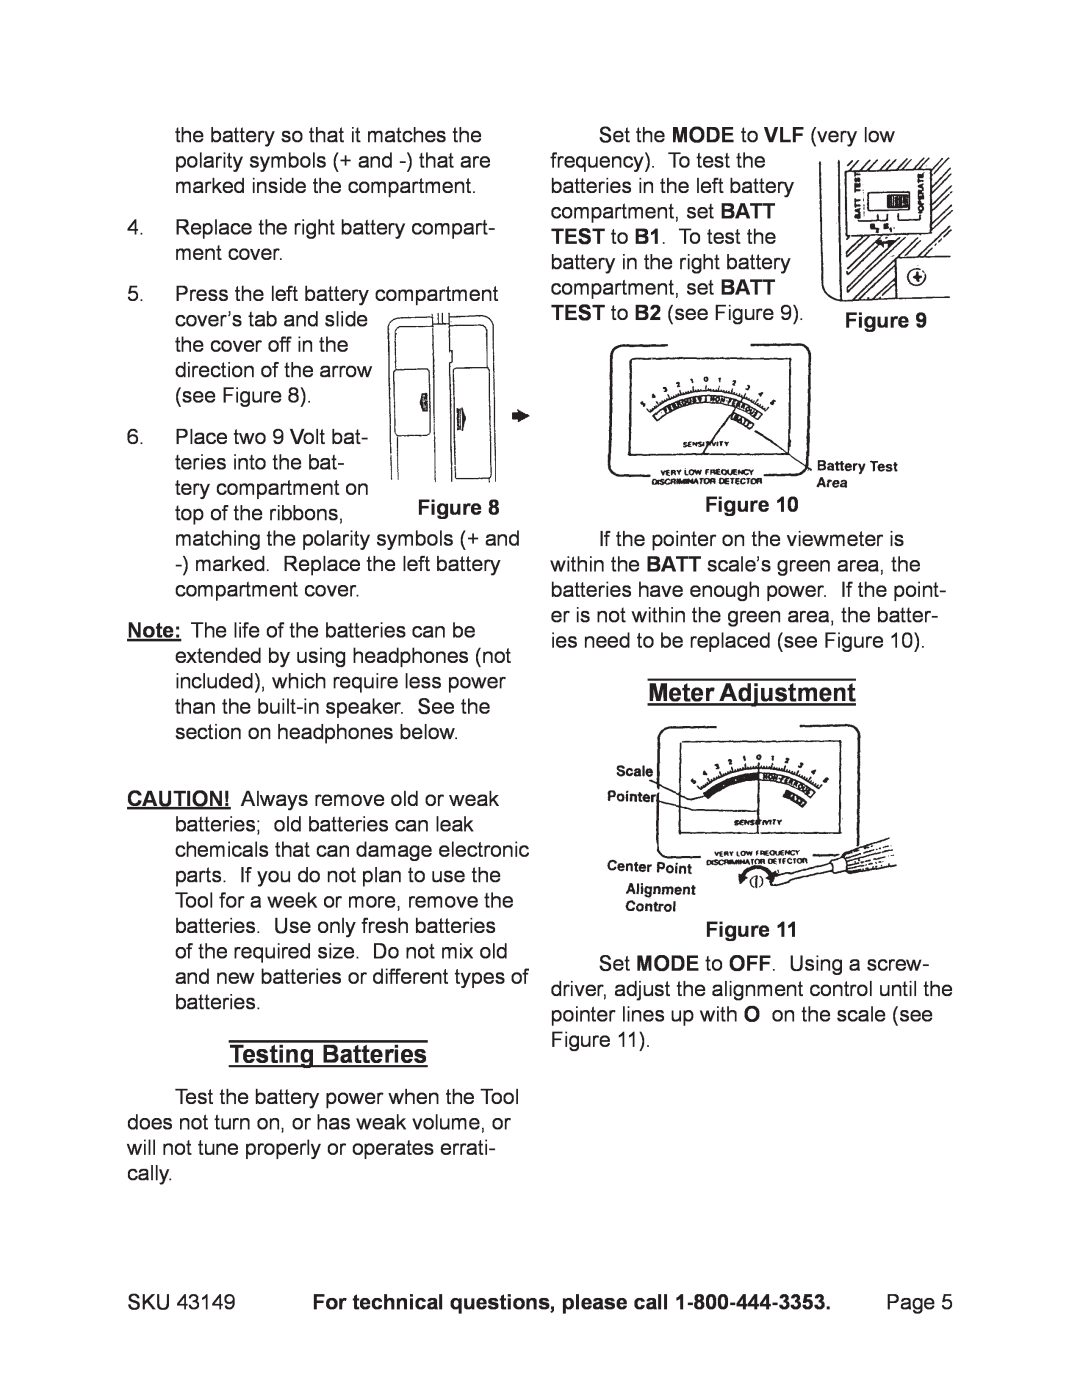 Harbor Freight Tools 43149 operating instructions Testing Batteries, Meter Adjustment, For technical questions, please call 